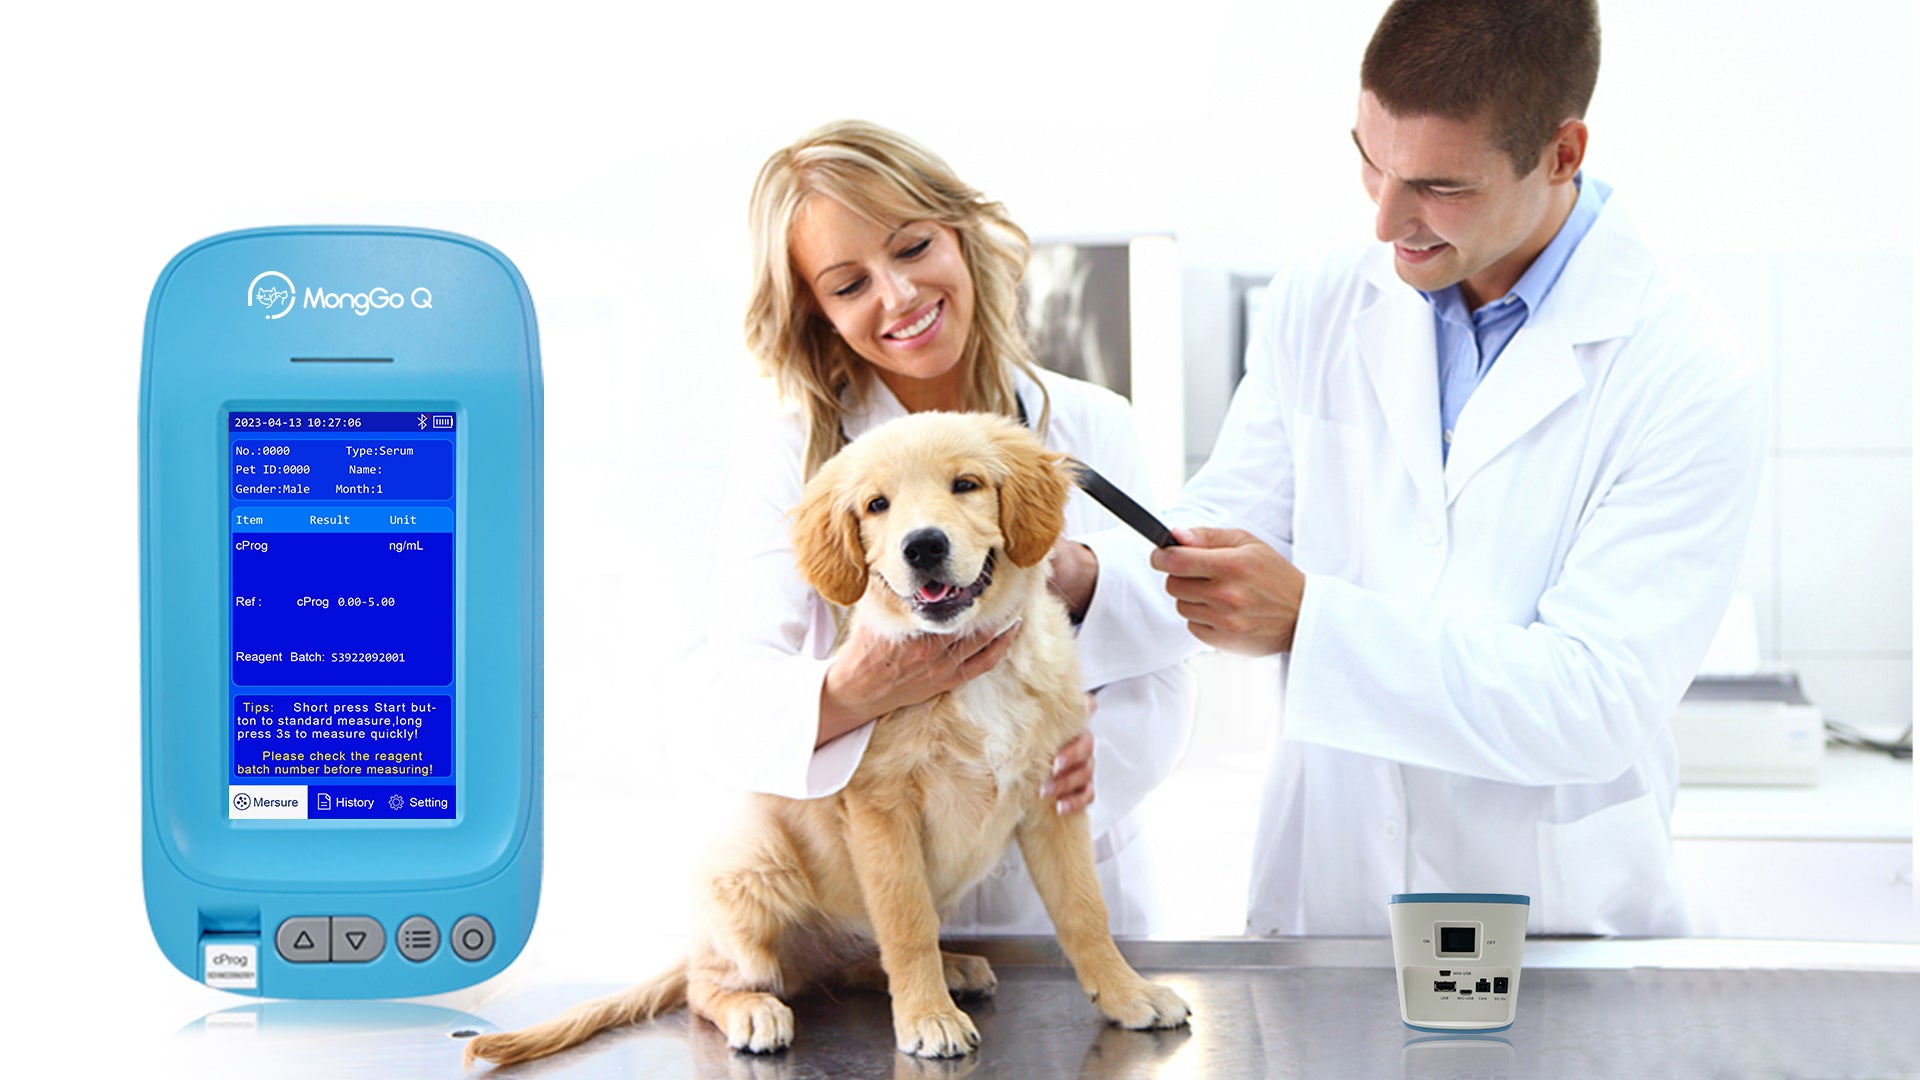 The progesterone levels in dogs can vary depending on different stages and conditions.